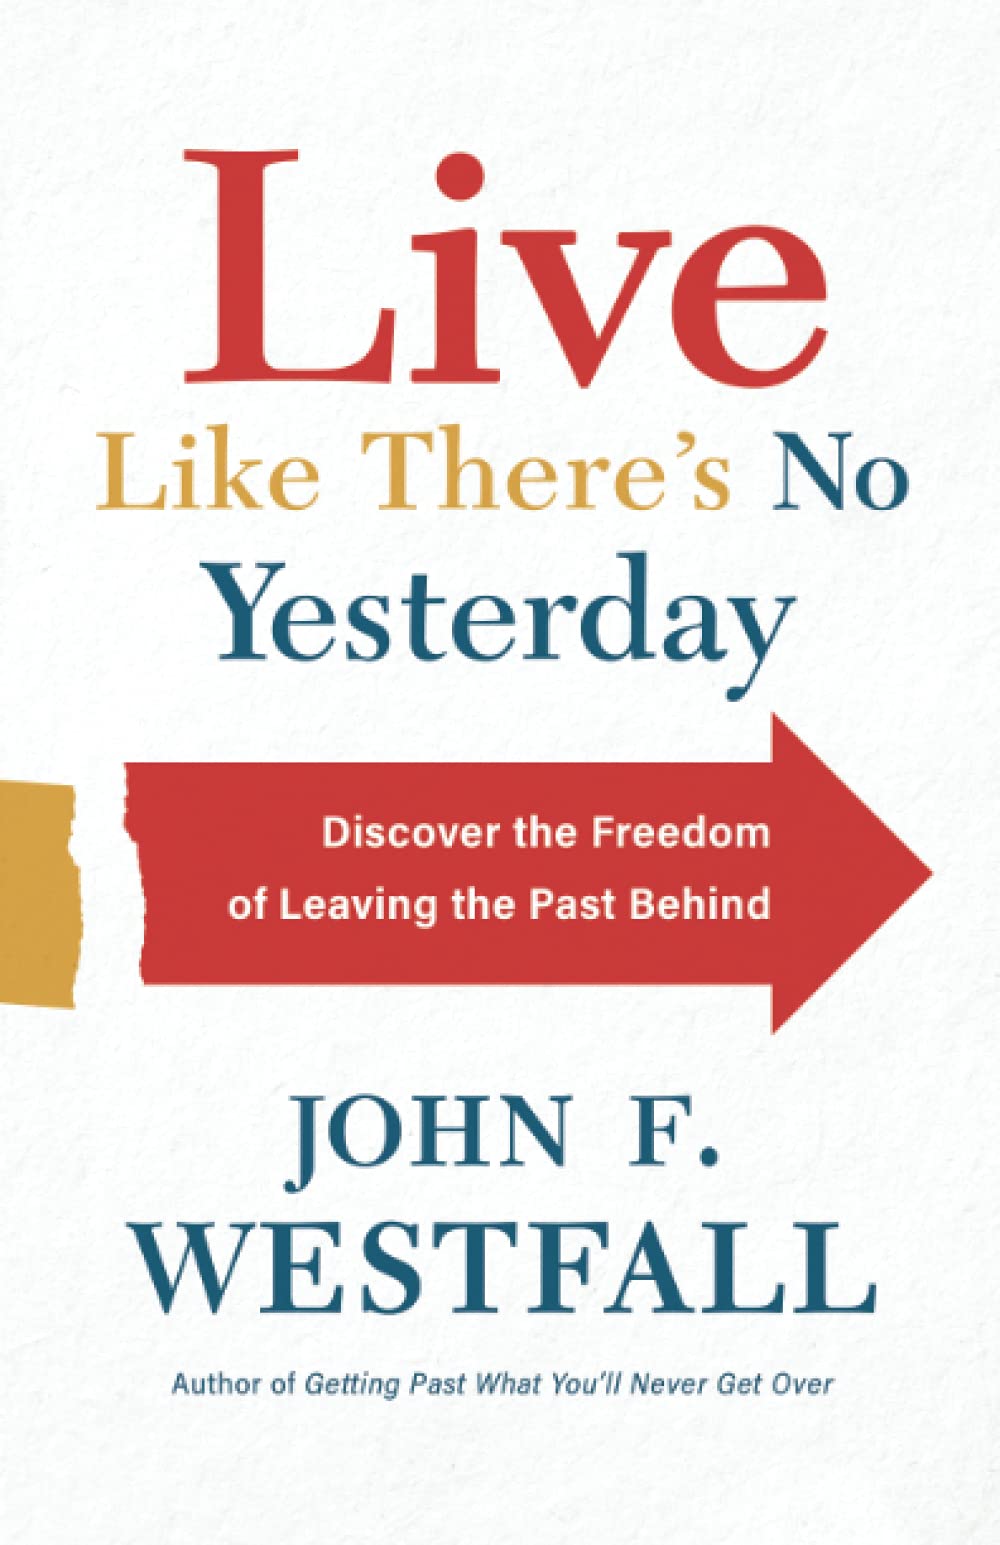 Live Like Theres No Yesterday : Discover the Freedom of Leaving the Past Behind - John F. Westfall - 9780800728083 - Baker Publishing Group